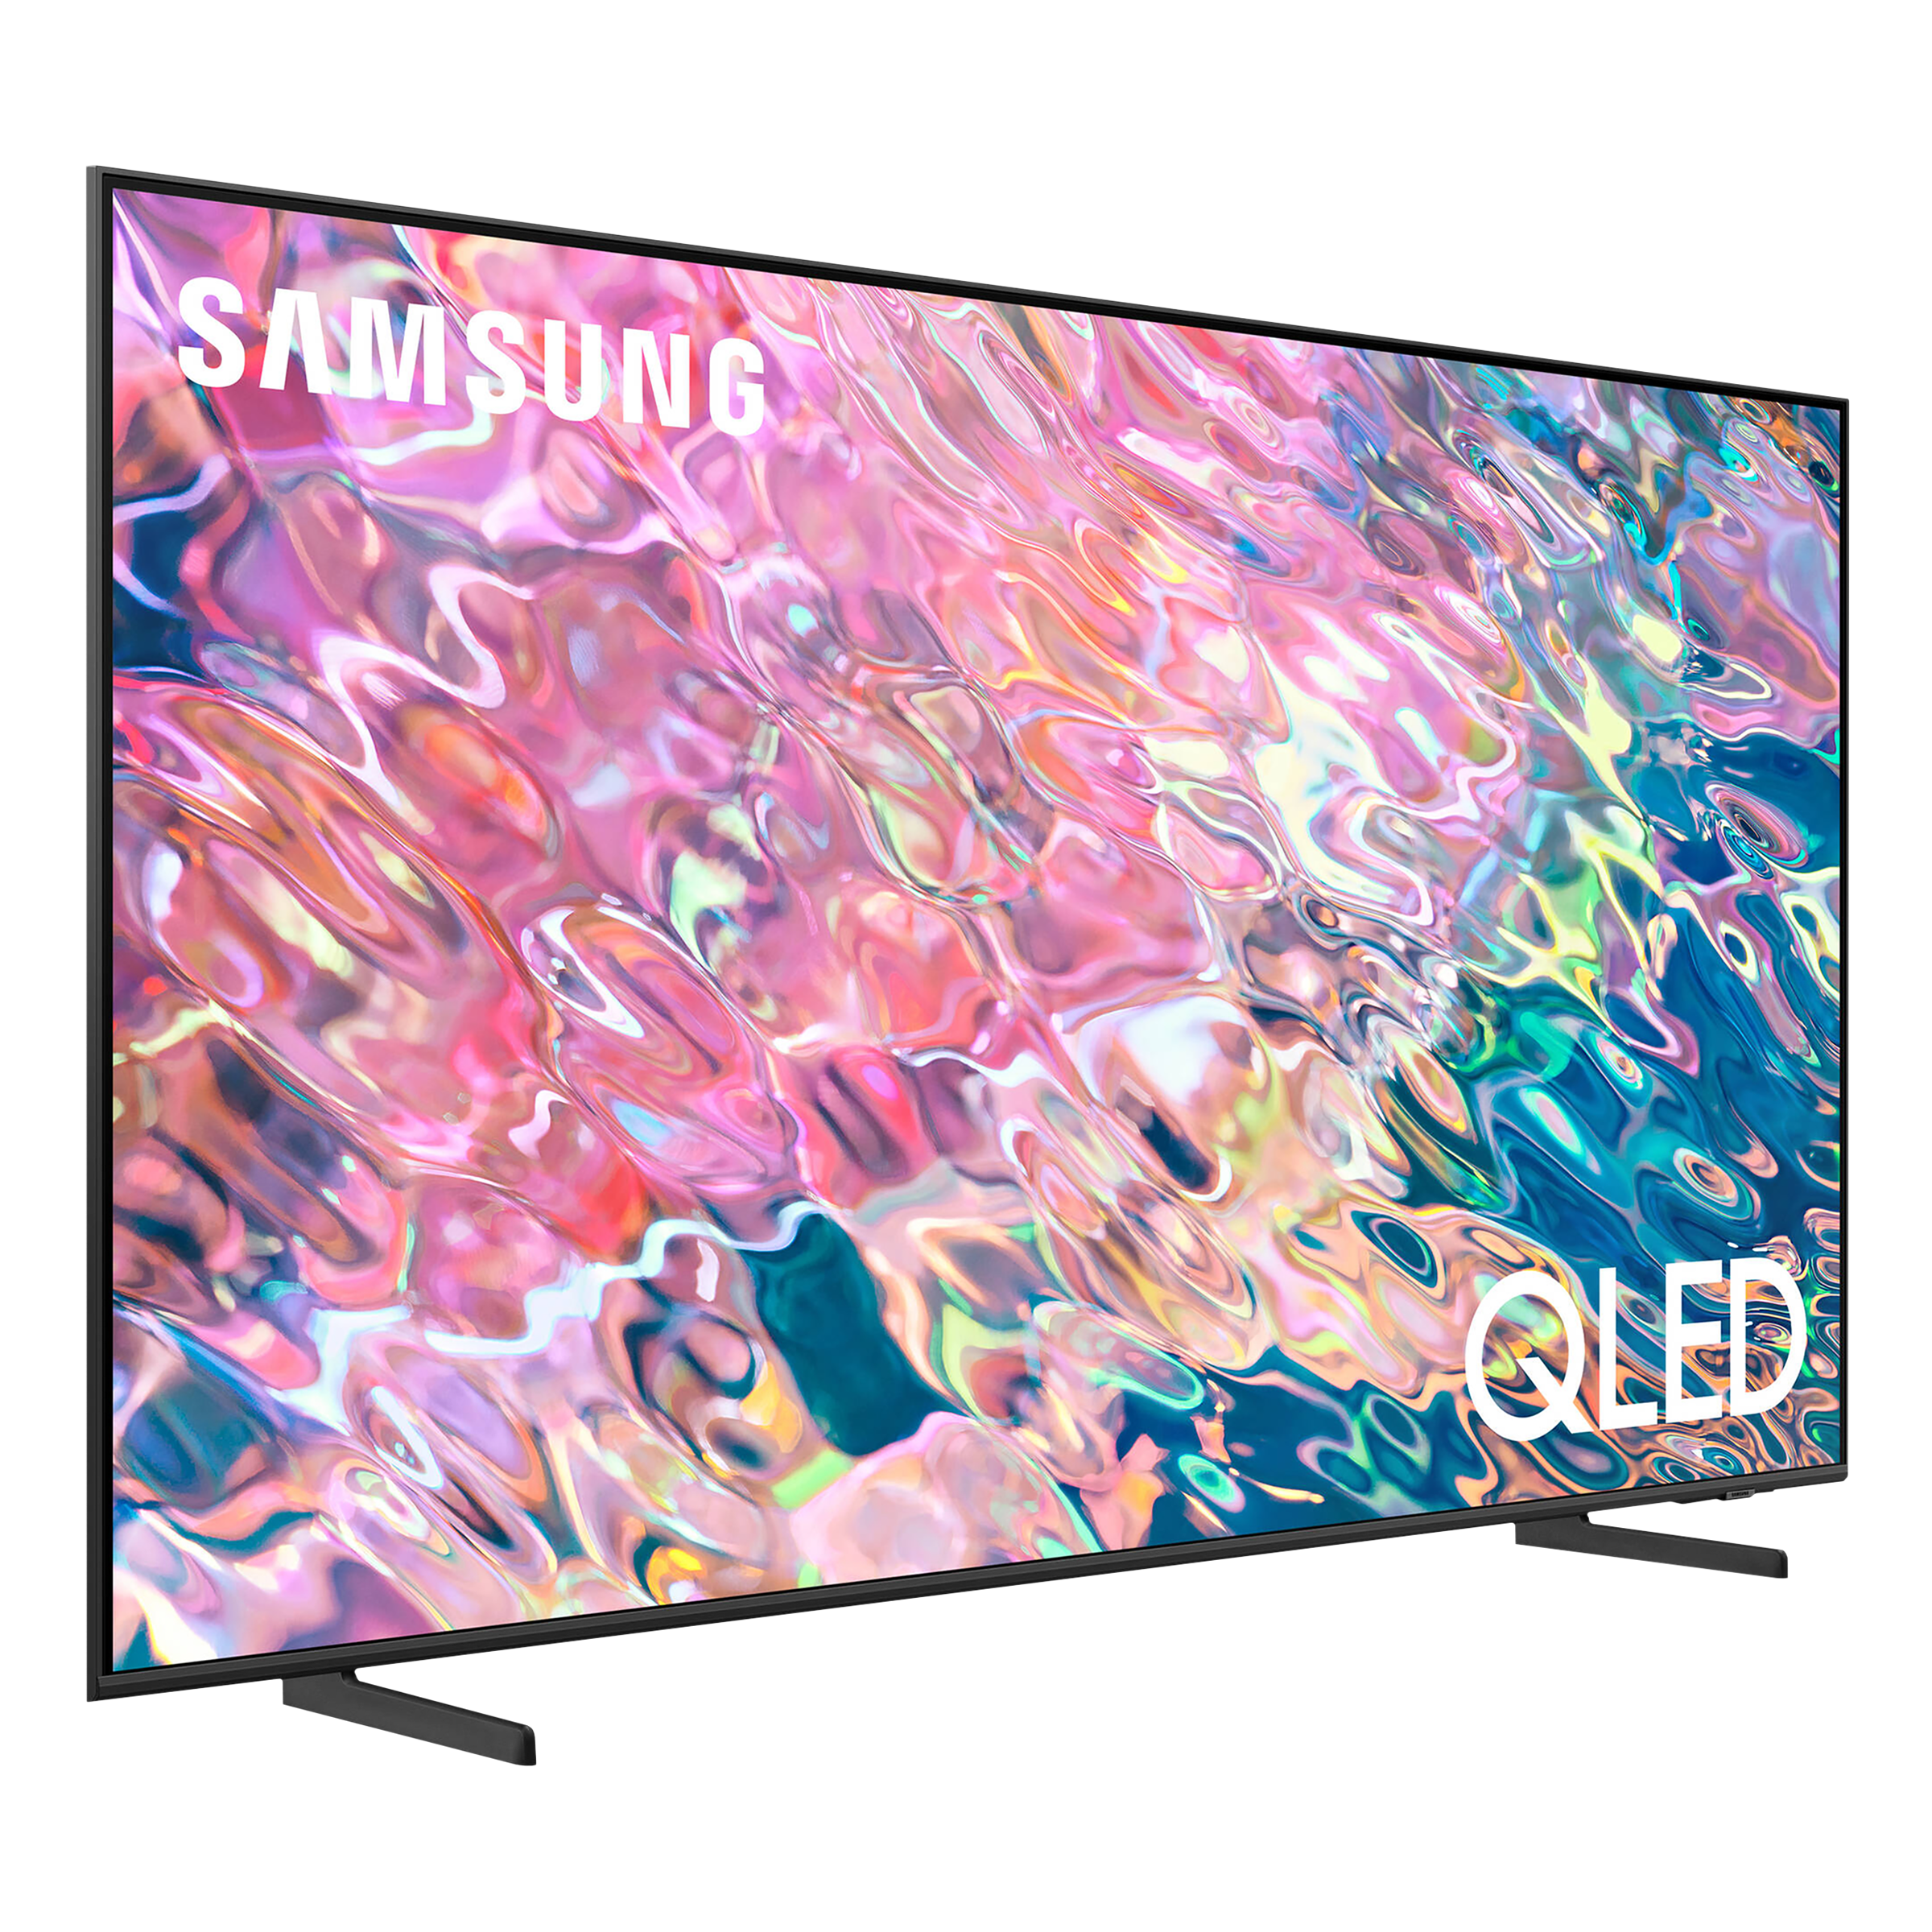 SAMSUNG Series 6 138 cm (55 inch) QLED 4K Ultra HD Tizen TV with Alexa Compatibility_4